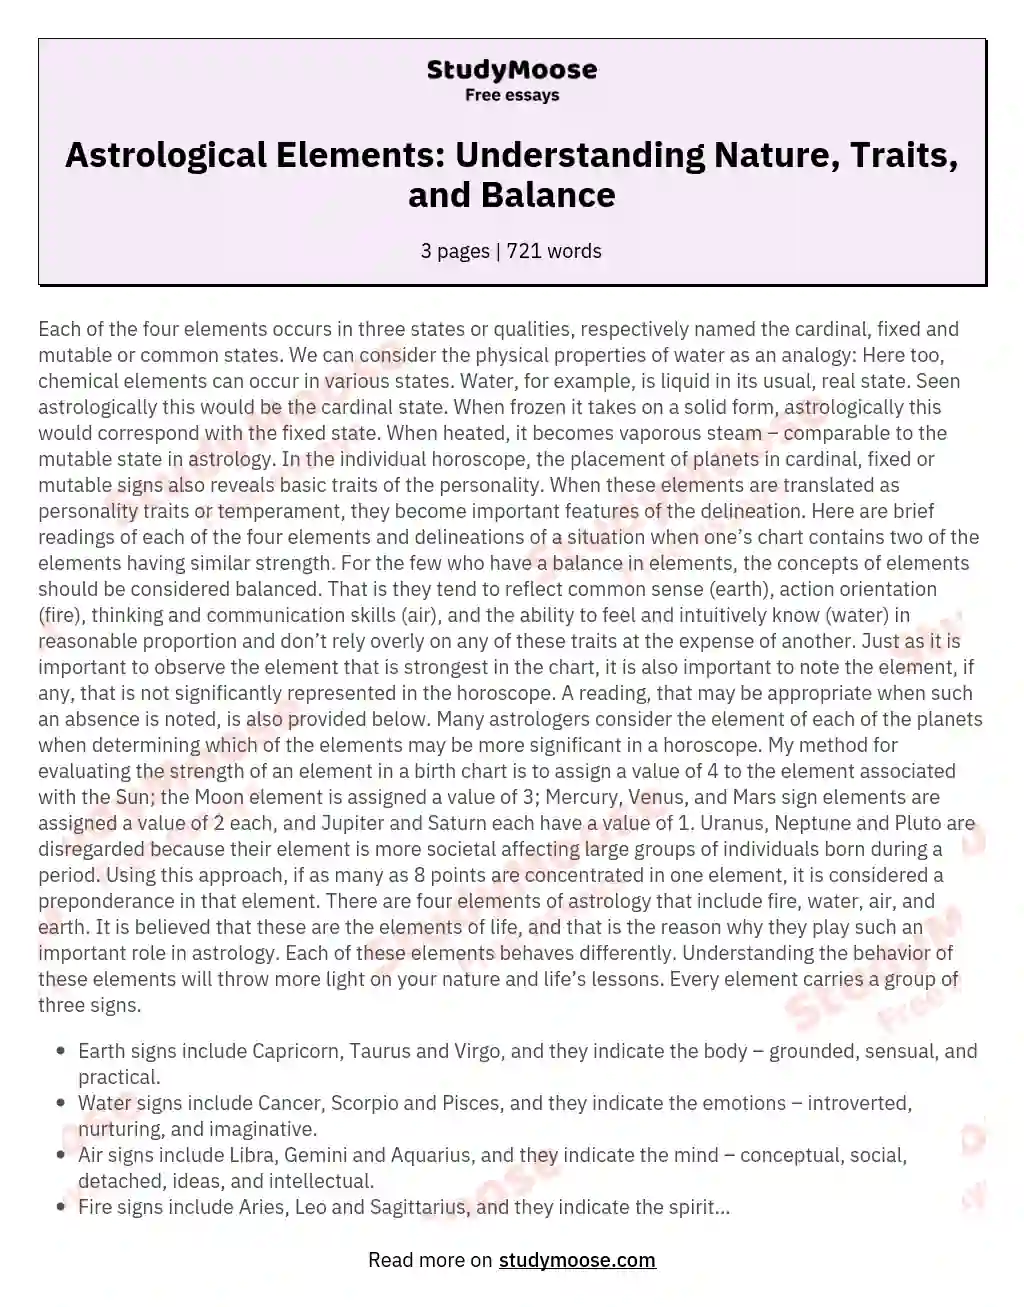 Astrological Elements: Understanding Nature, Traits, and Balance essay